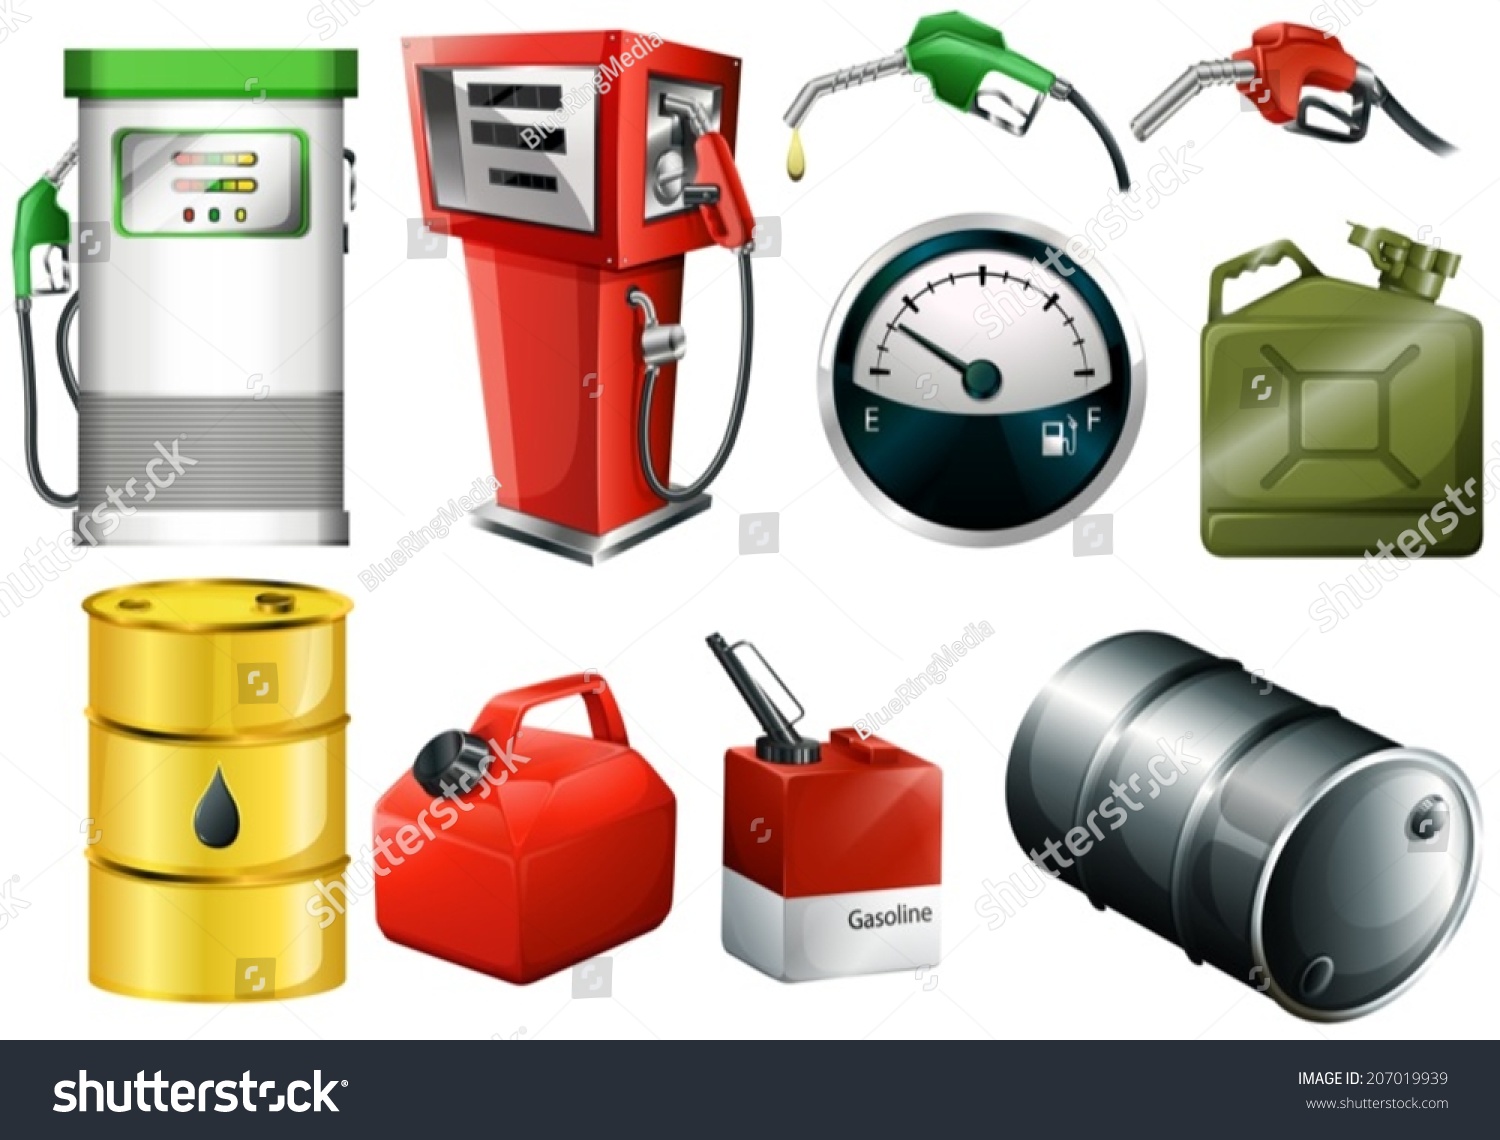 SVG of Illustration of the different fuel cans on a white background svg